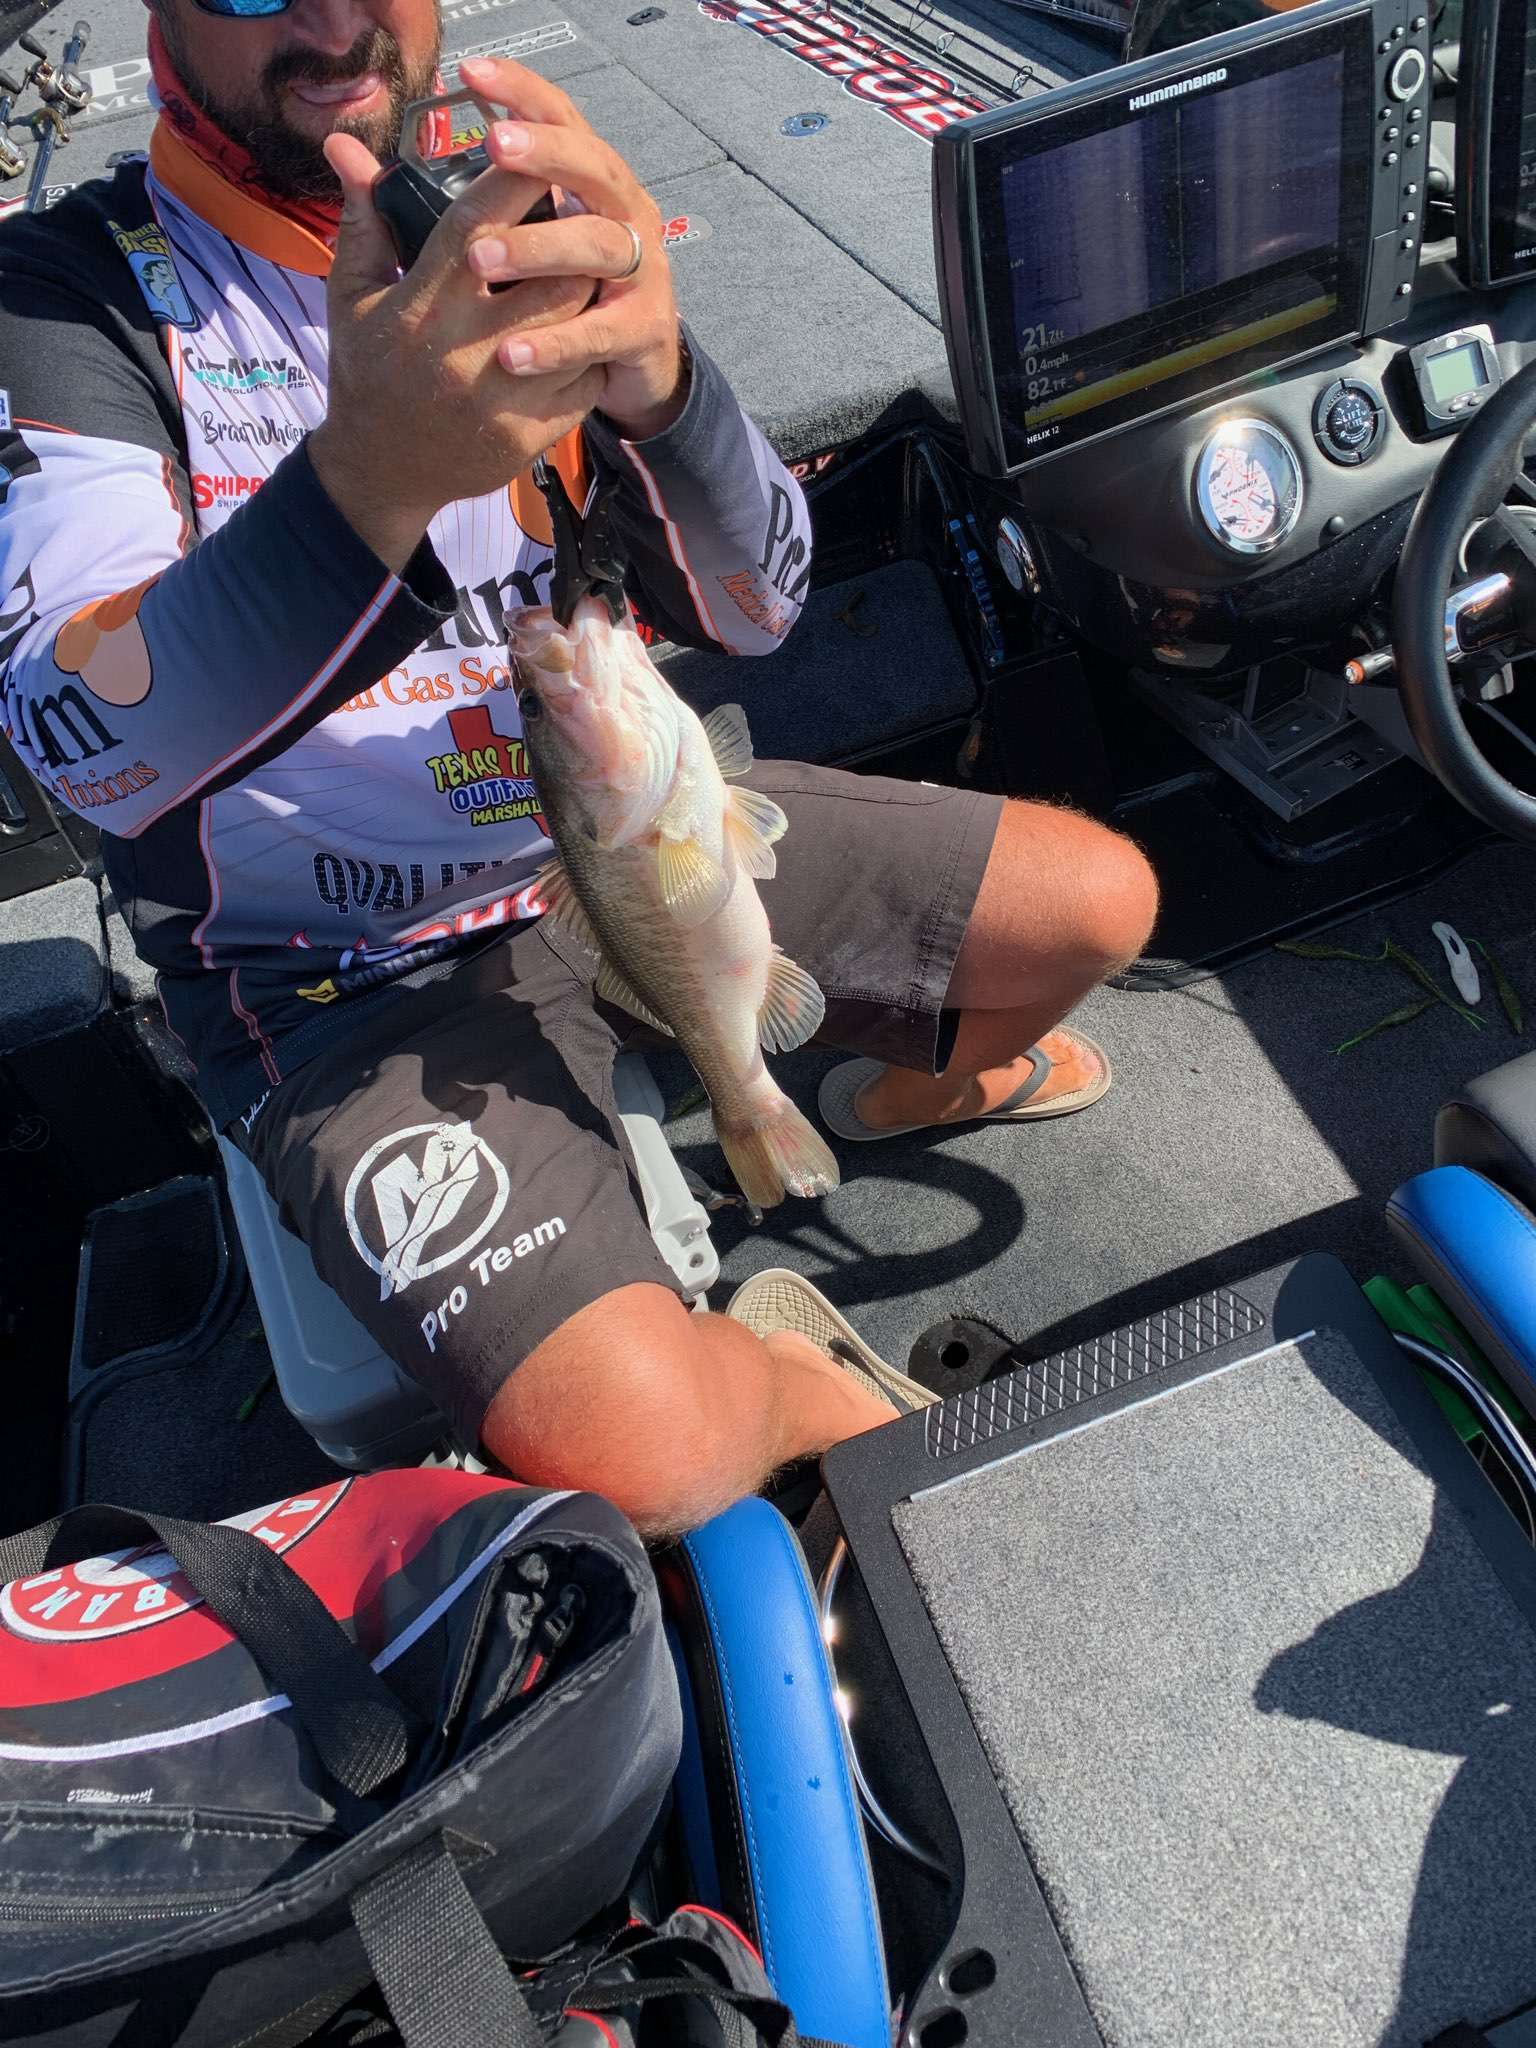 Follow along with photos from the Bassmaster Marshals here on day 2 at the 2020 DEWALT Bassmaster Elite at Lake Eufaula.